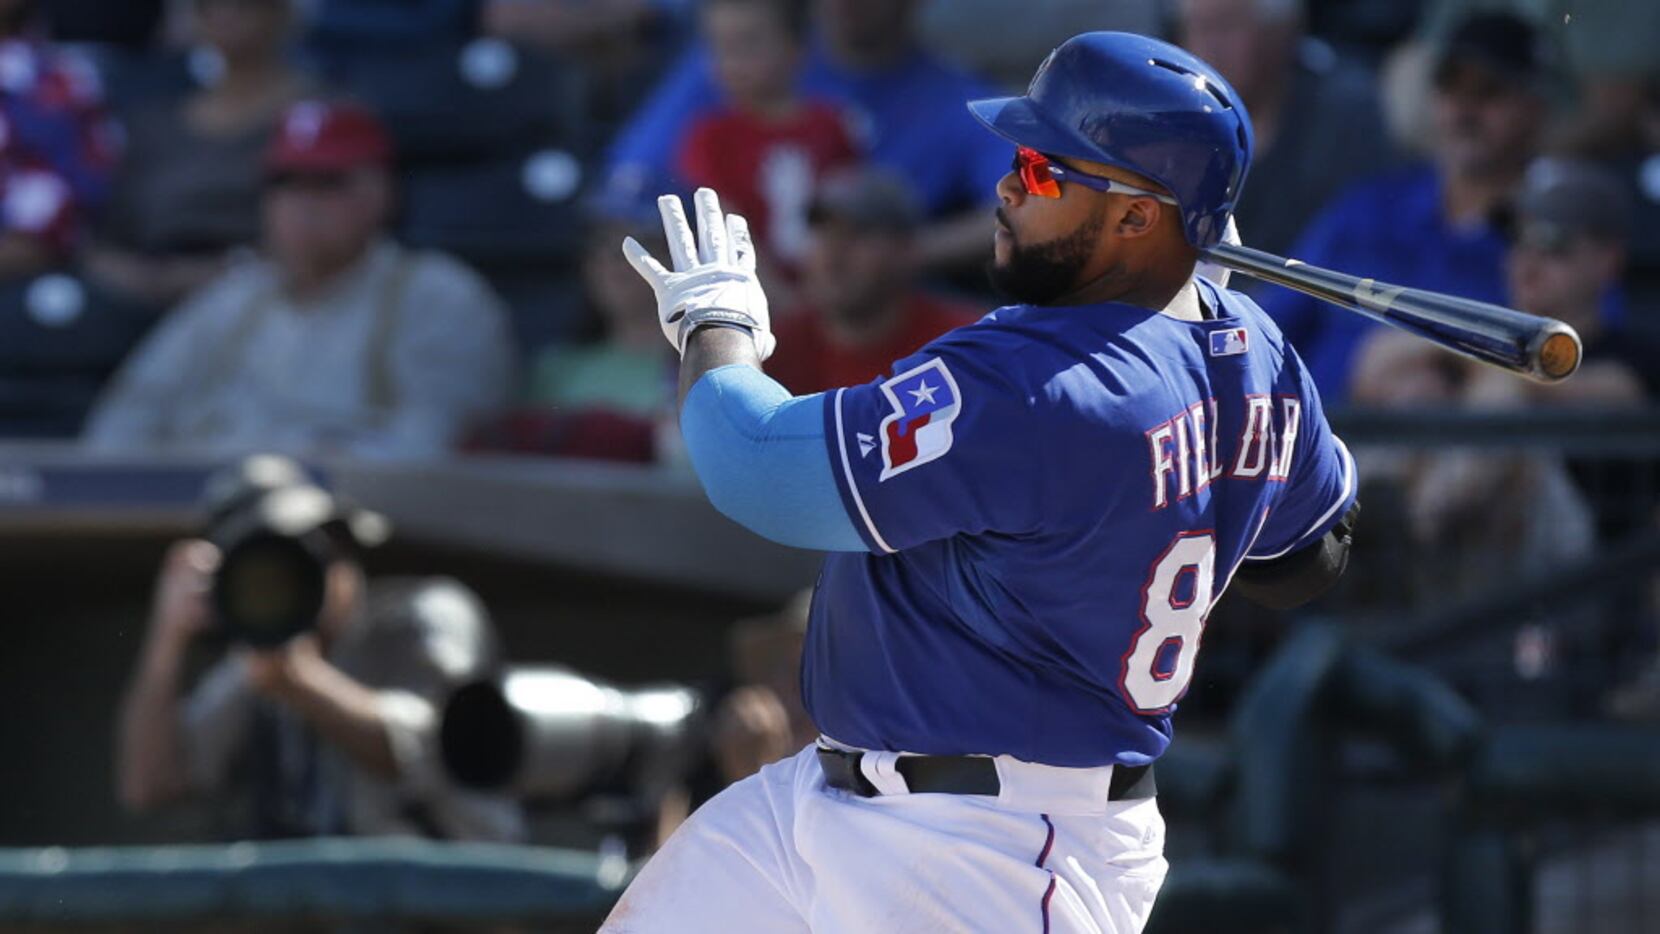 National columnist: Prince Fielder has a lot to do with producing MVPs